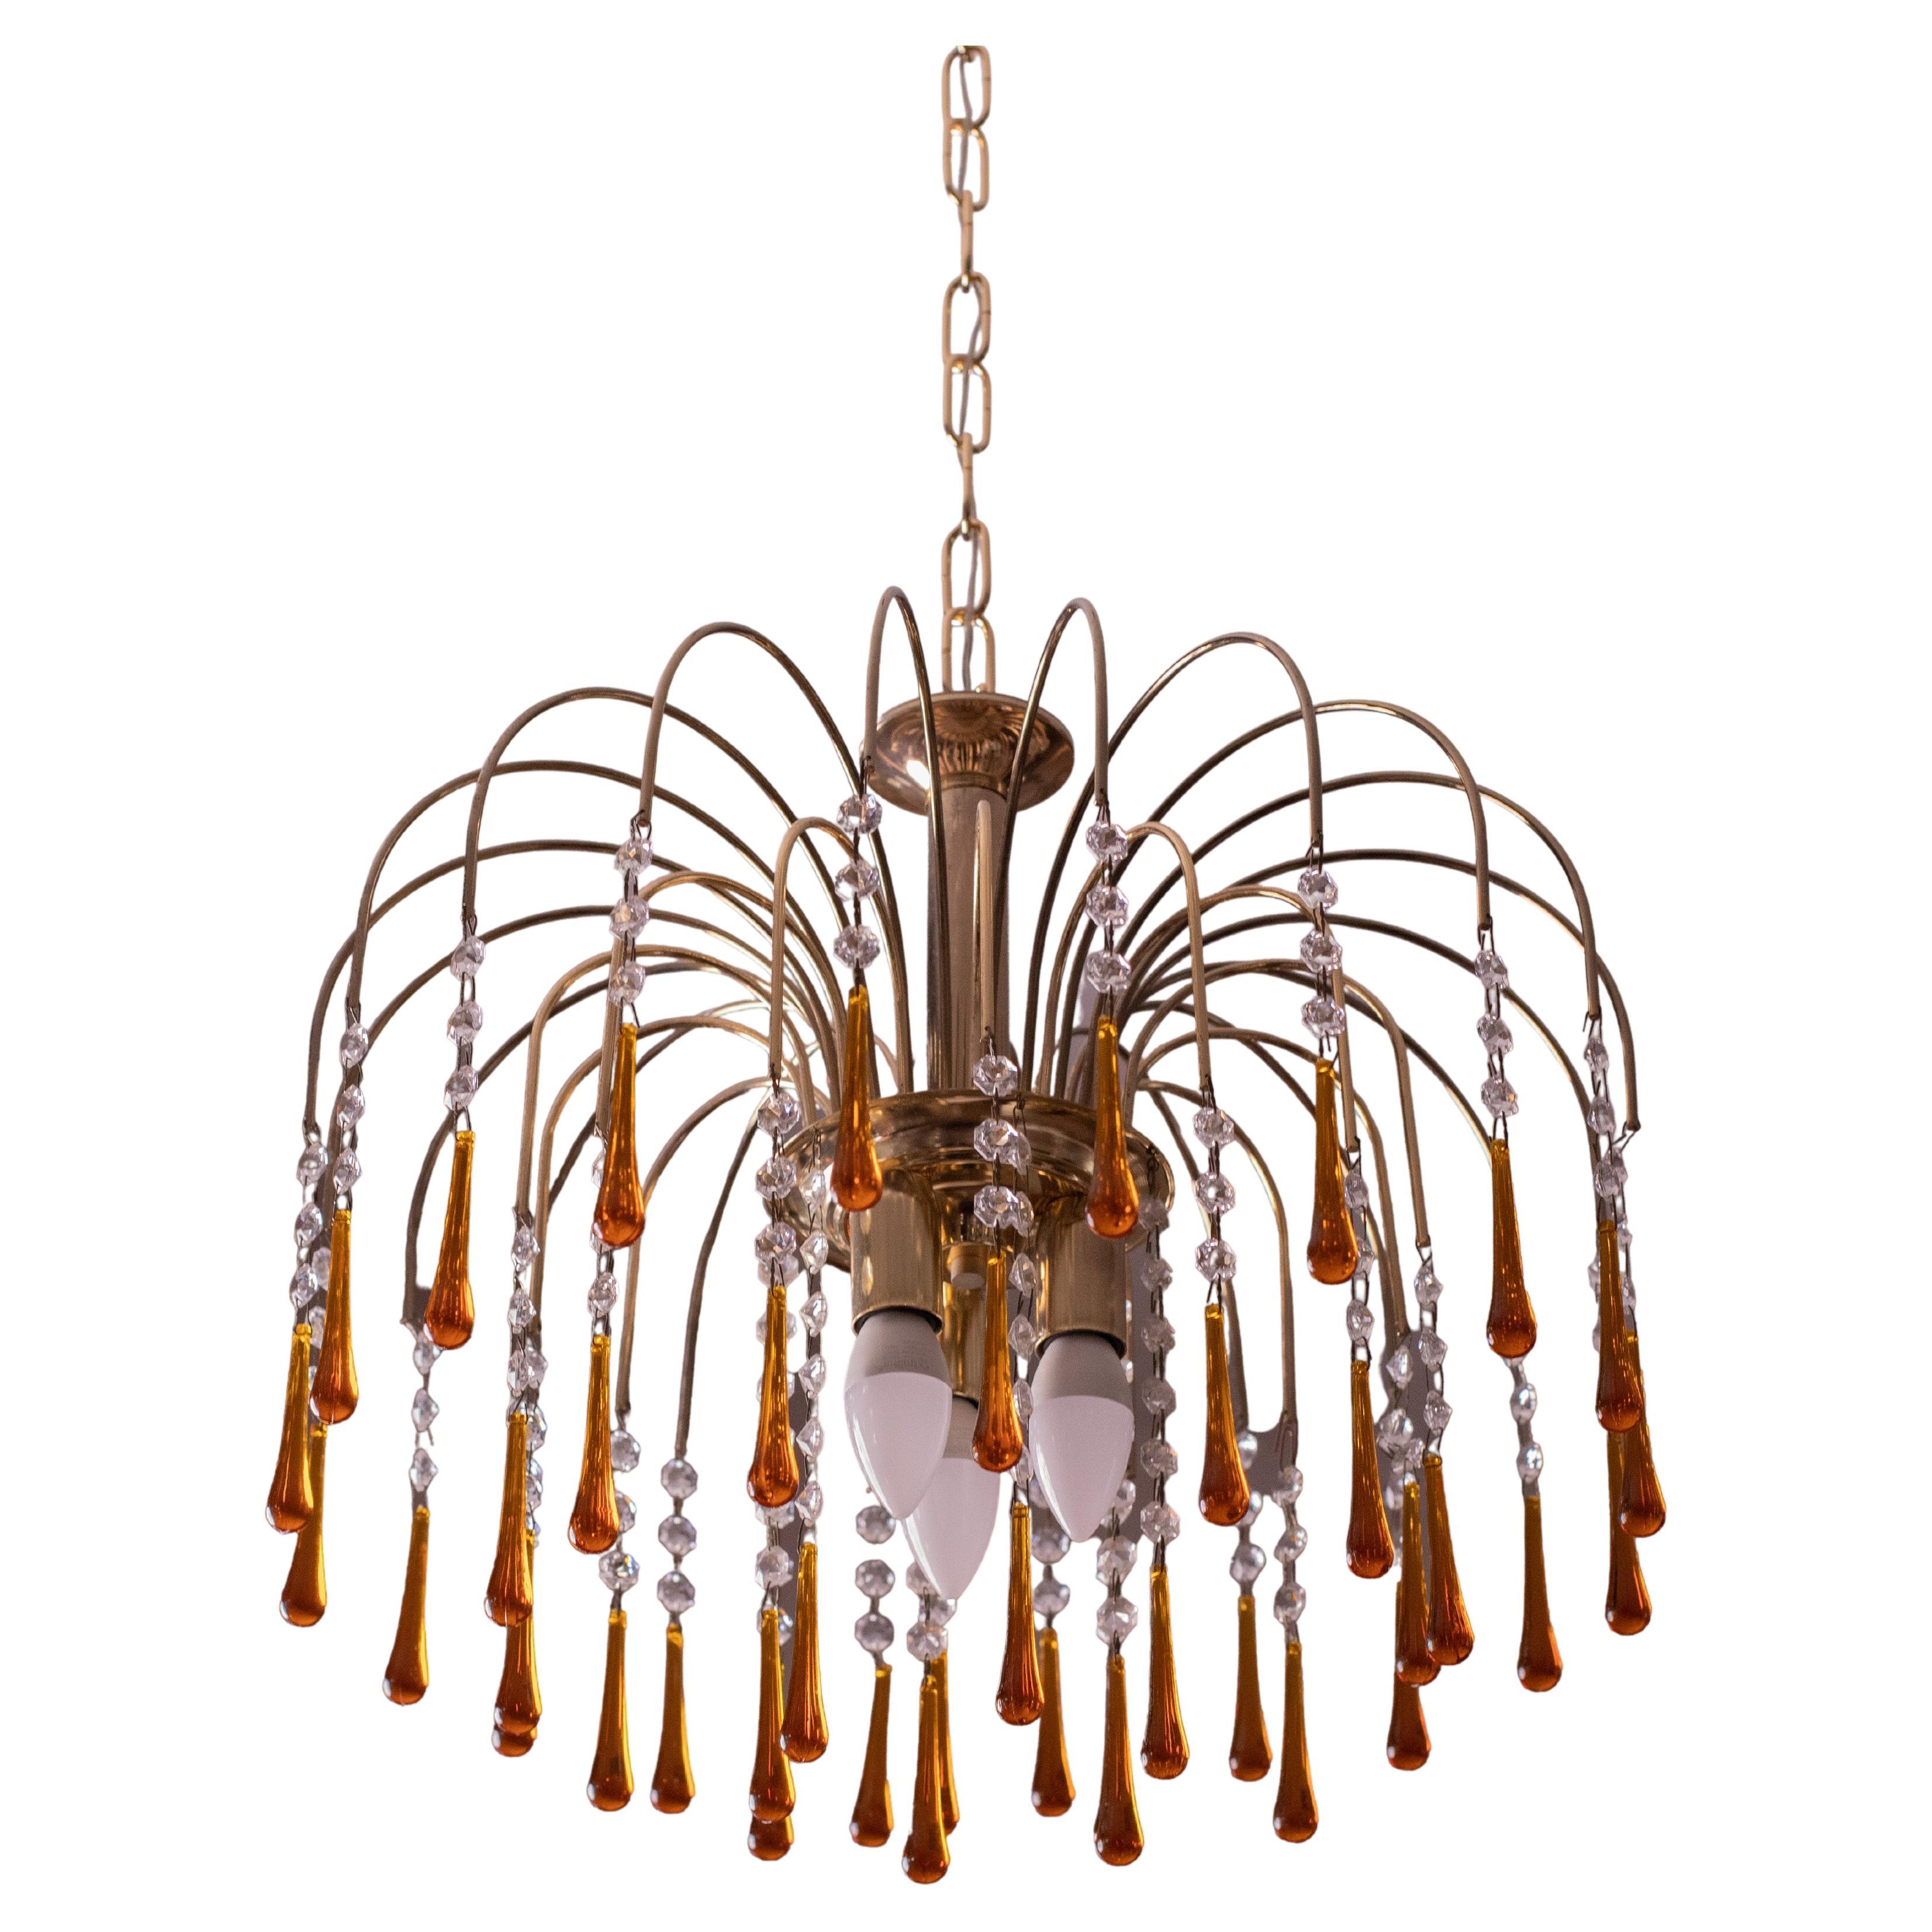 Lady Sophie, Amber Drops Chandelier, 1980s